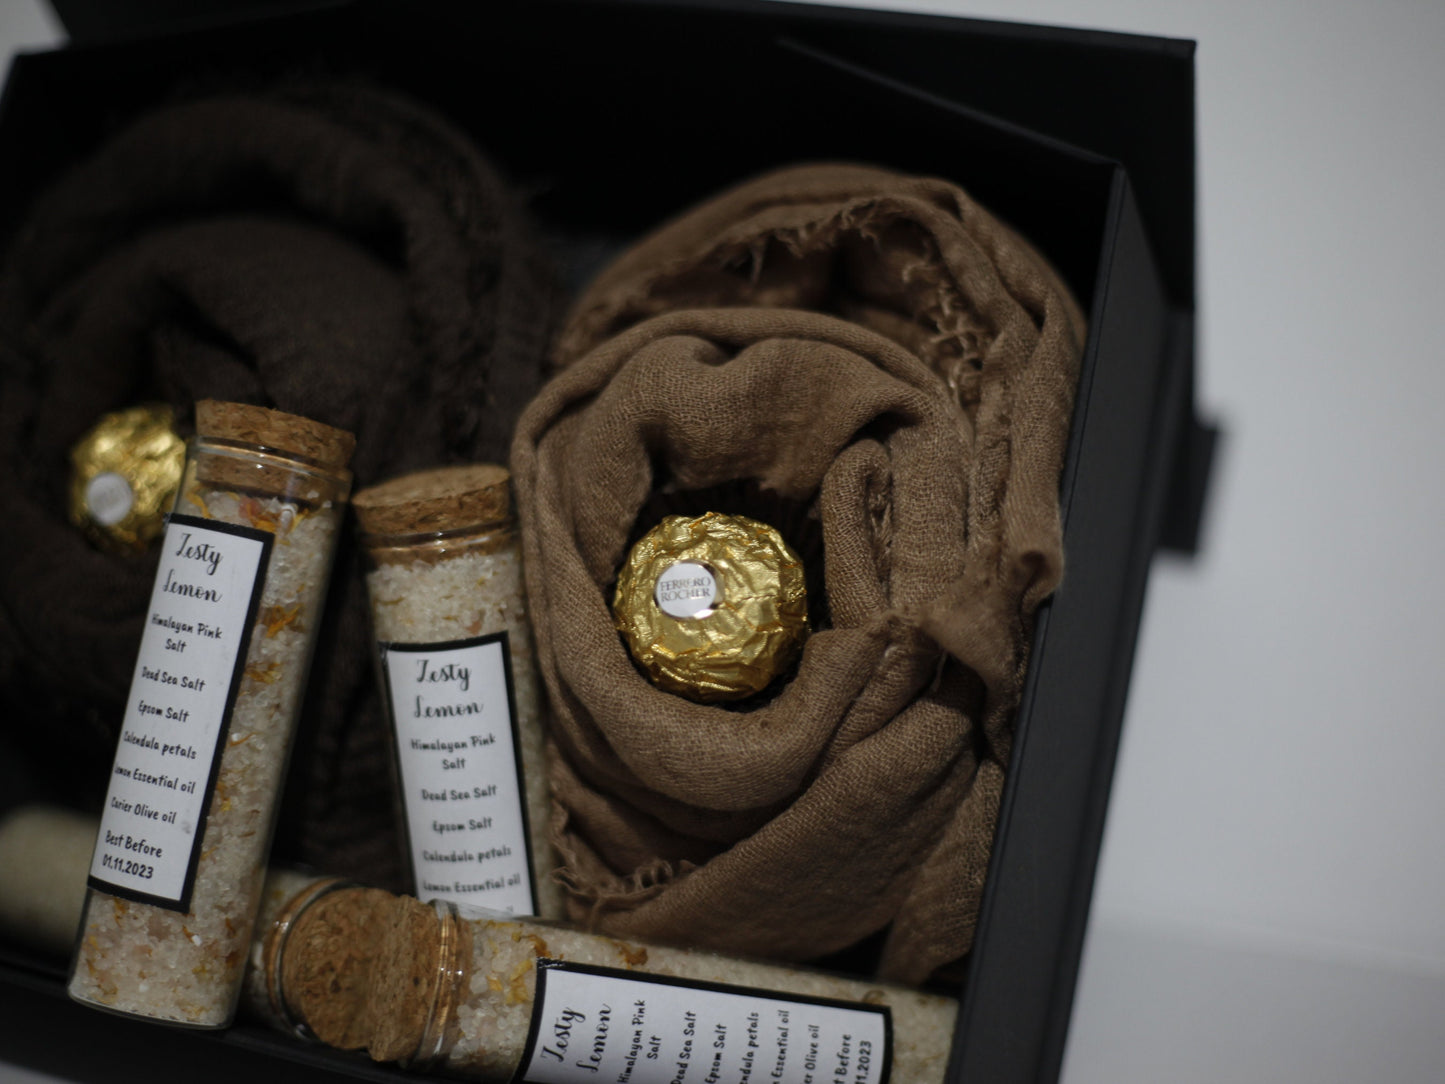 Scarf gift box set with handmade bath salts, chocolates, gift card and gift message, gifts for her, gifts for Christmas, Gifts for Mum,